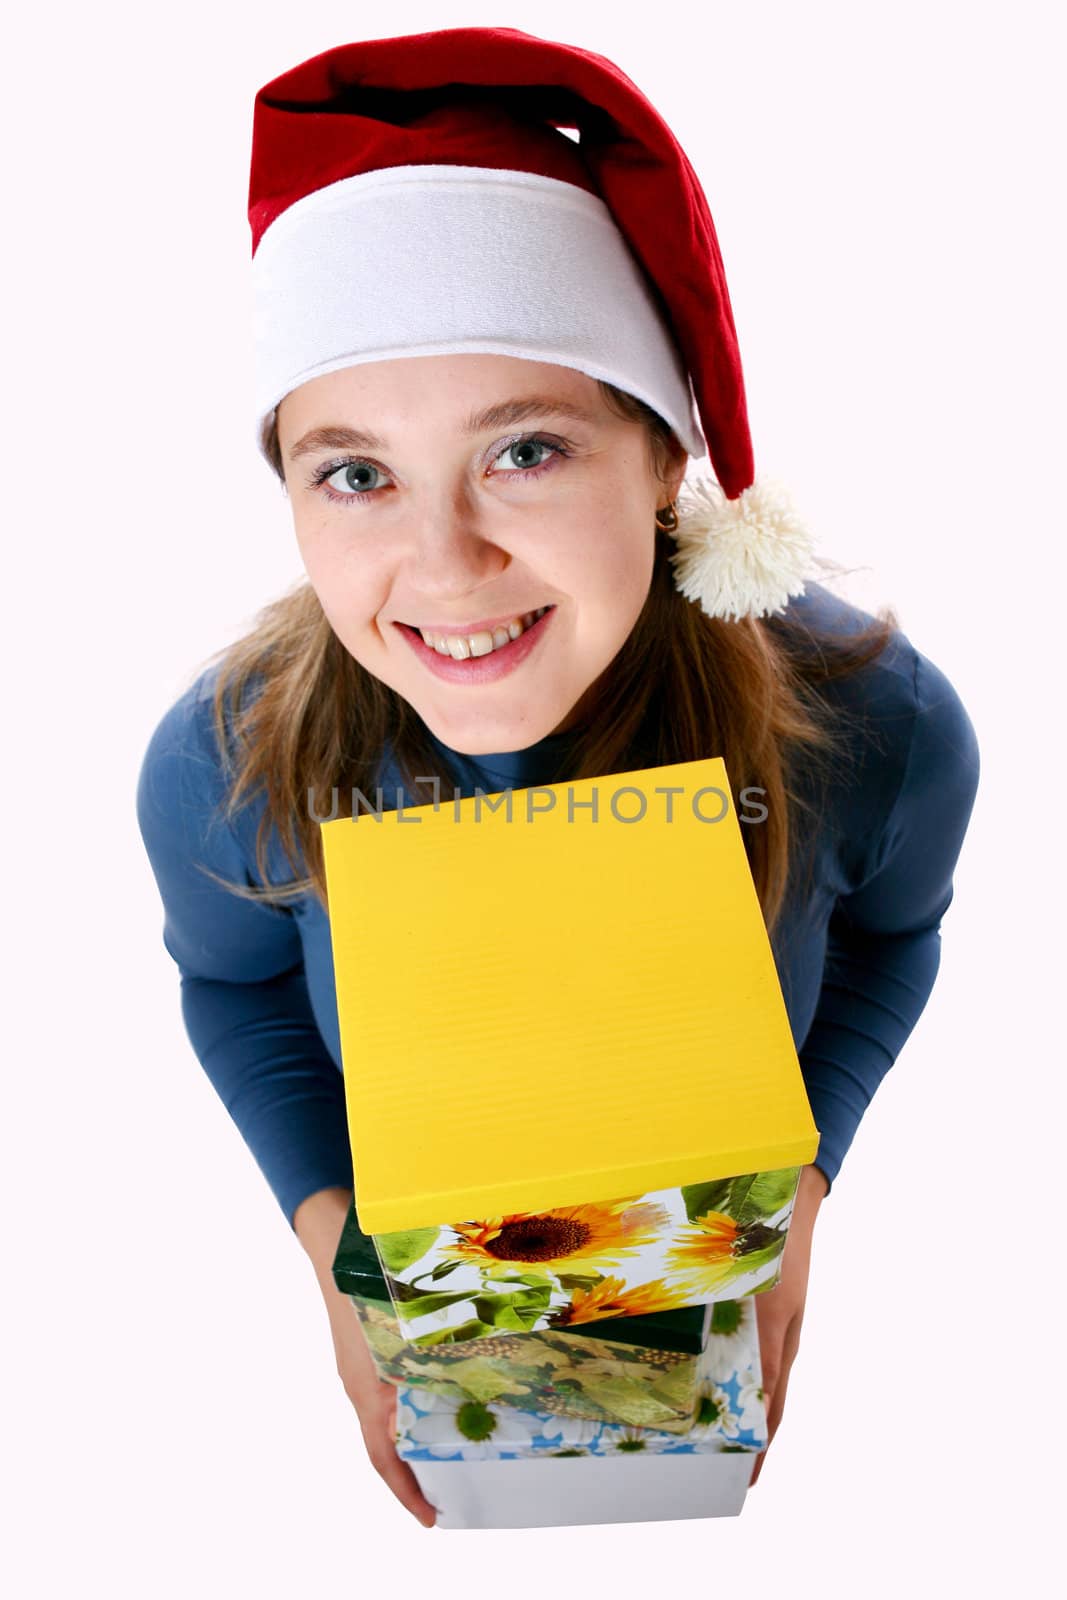 A girl in a new year cap with a yellow box